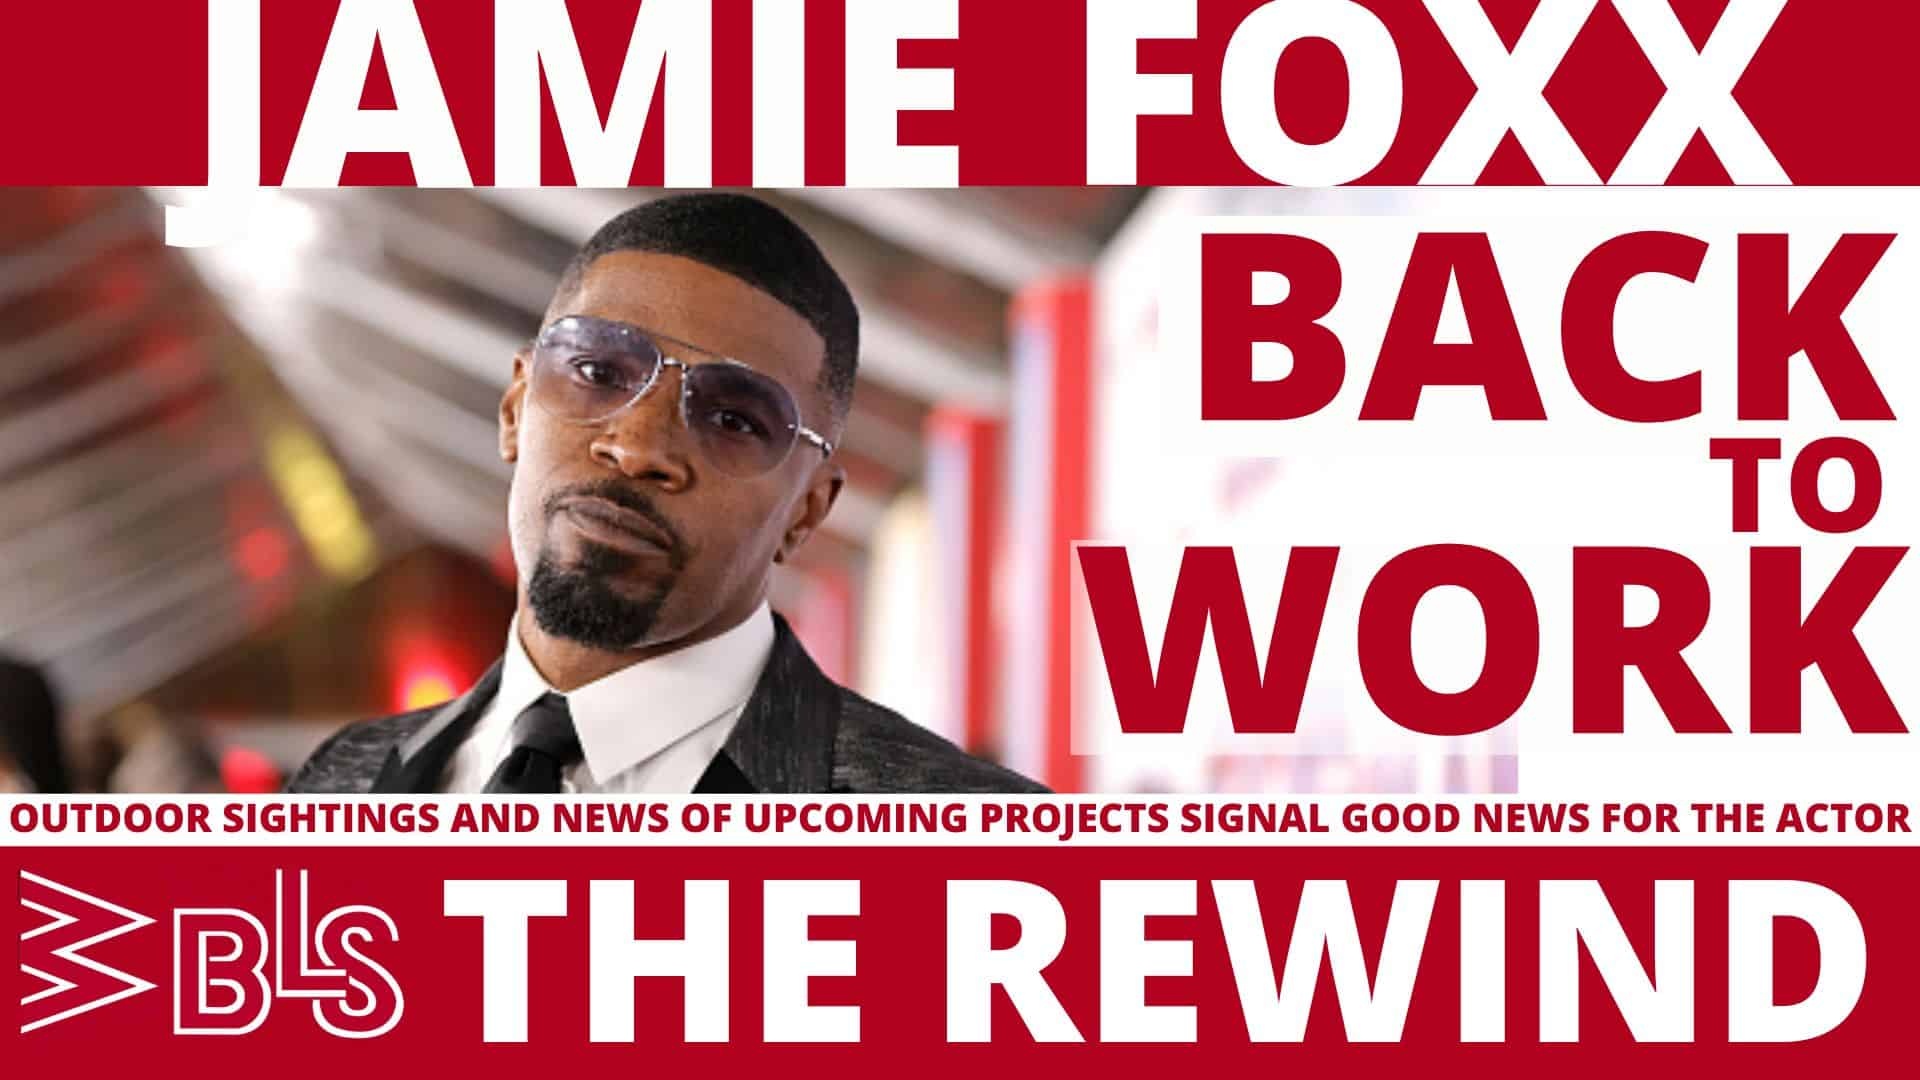 Jamie Foxx Spotted Outside & Back To Work, Jury Puts 'Respect' On Aretha Franklin's Will